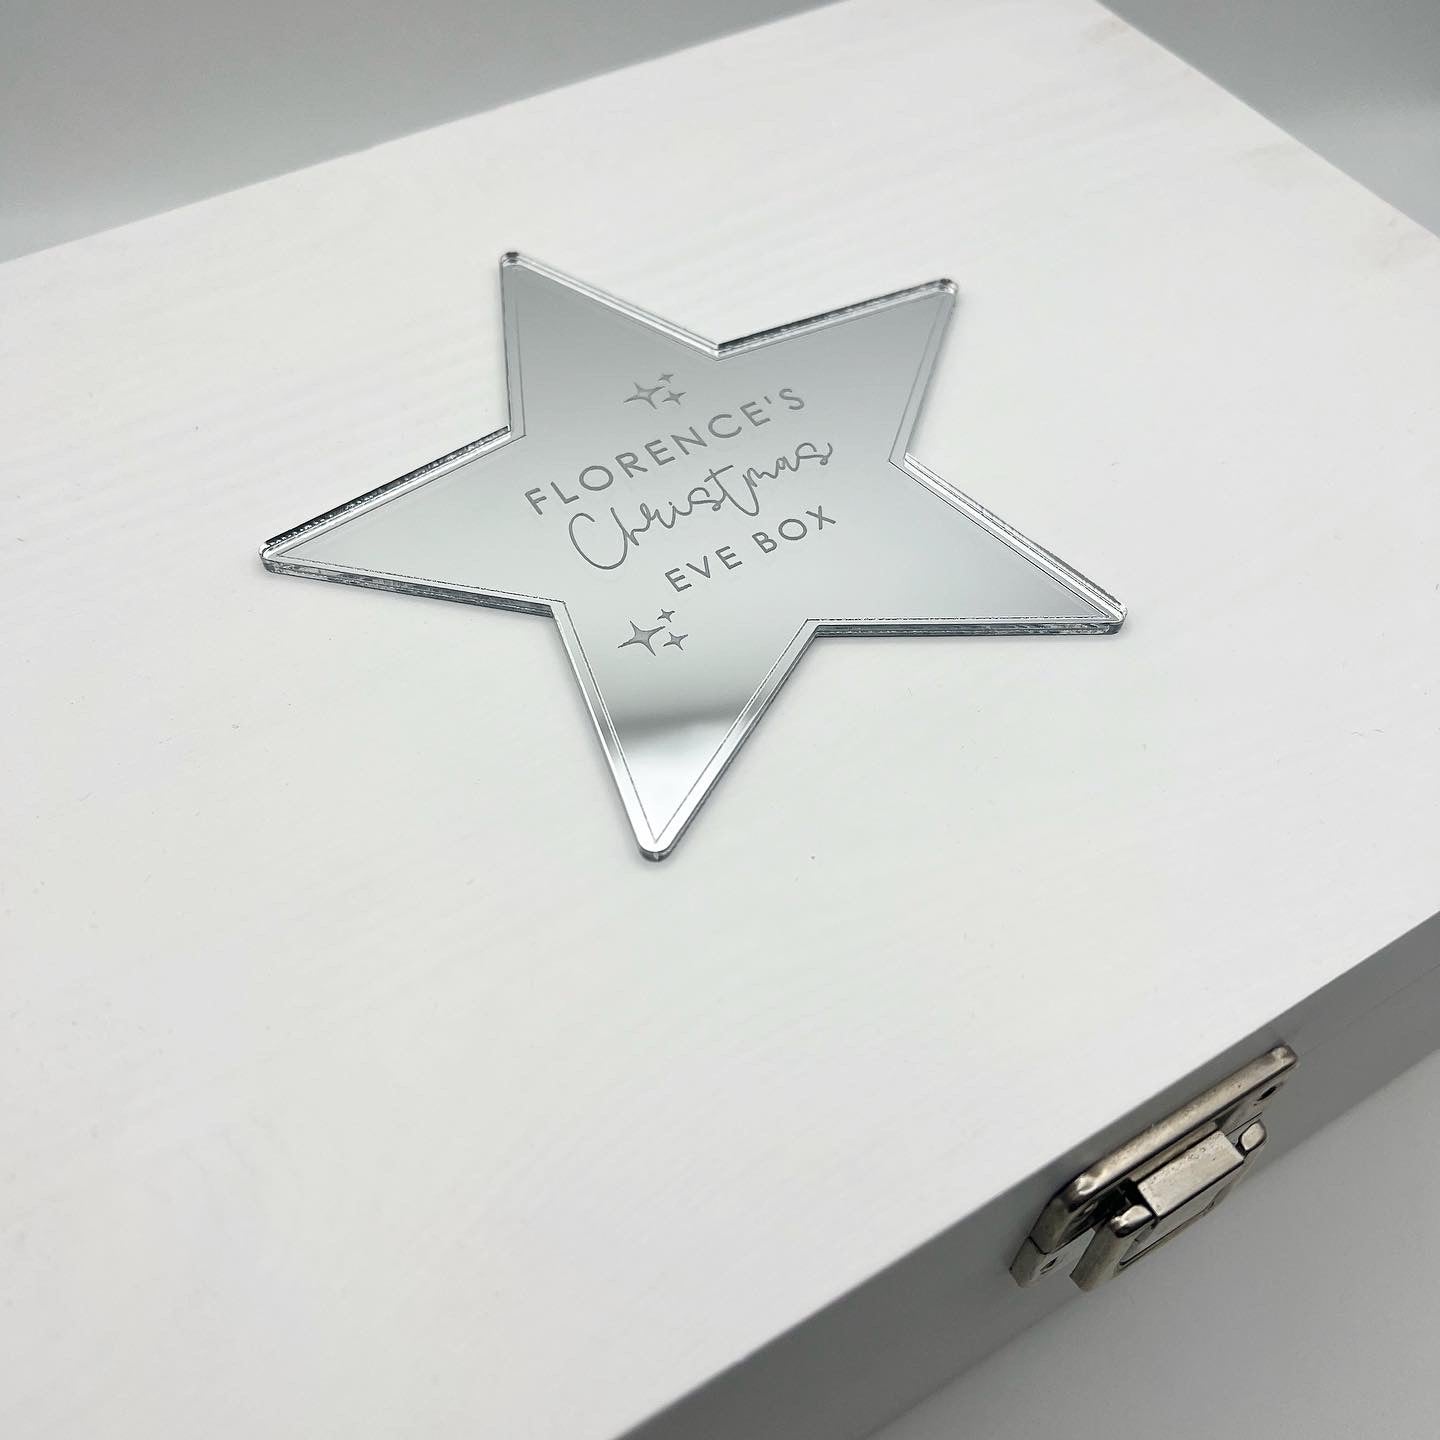 White wooden Christmas Eve box with personalised star